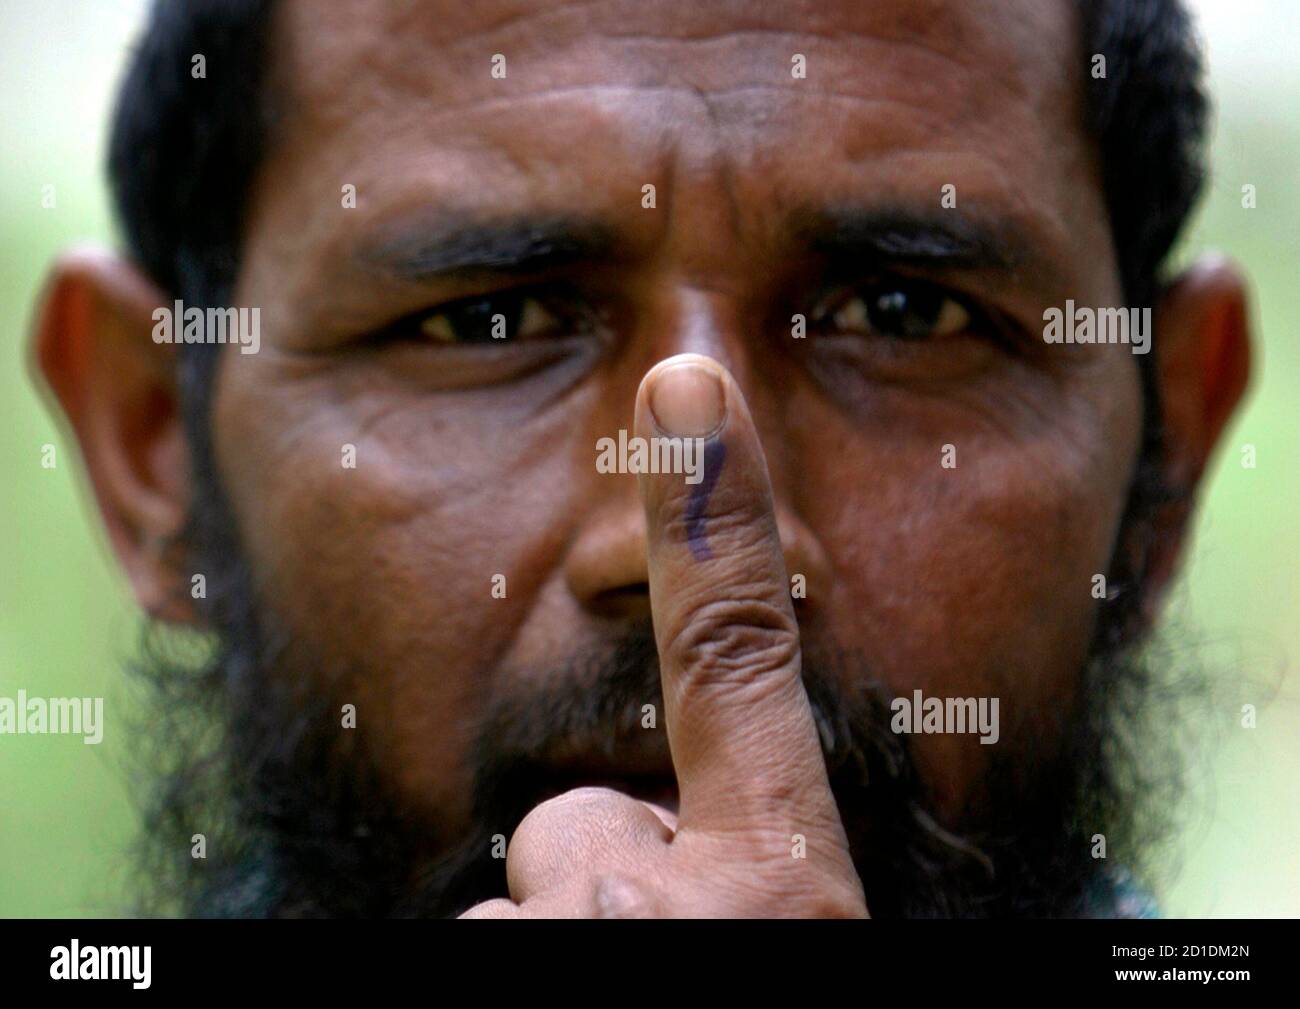 A Muslim man shows his ink-marked finger after casting his ballot at a polling station in Tiamari village, about 280 km (174 miles) west from Guwahati, the major city of India's northeastern state of Assam April 23, 2009. Tens of millions of Indians from insurgency-hit states to the IT hub of Bangalore began voting on Thursday in the second round of a month-long election that could throw up a weak coalition amid an economic slump. REUTERS/Rupak De Chowdhuri (INDIA POLITICS ELECTIONS) Stock Photo